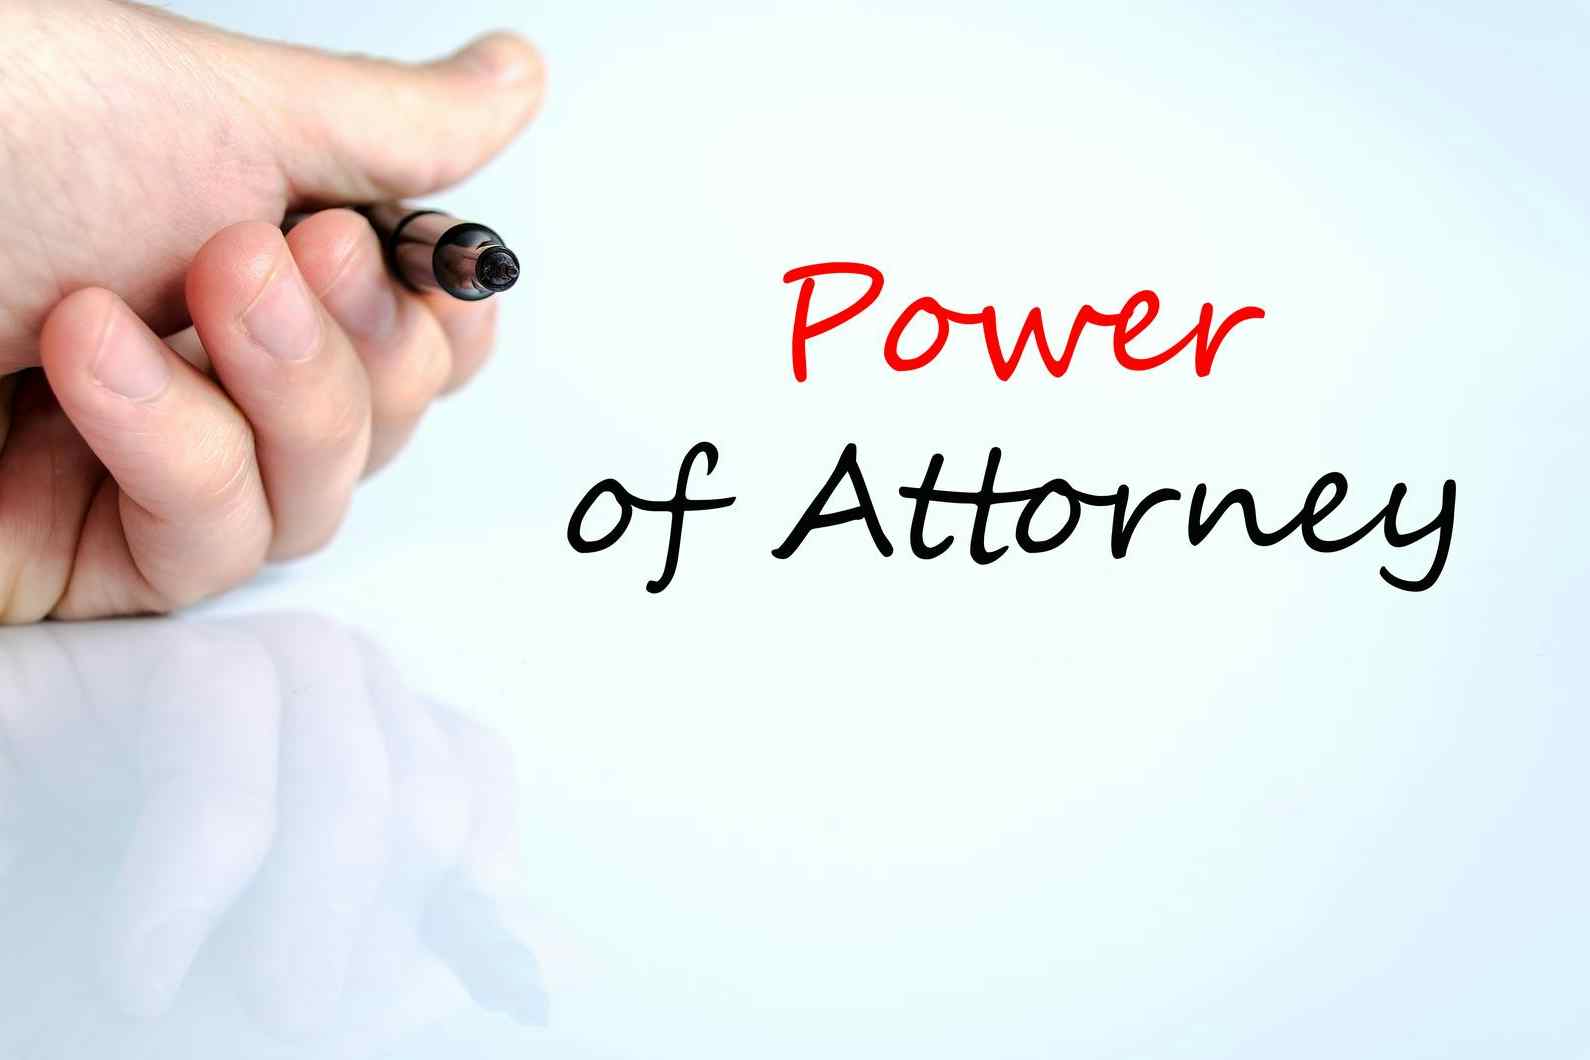 How and when to use lasting power of attorney